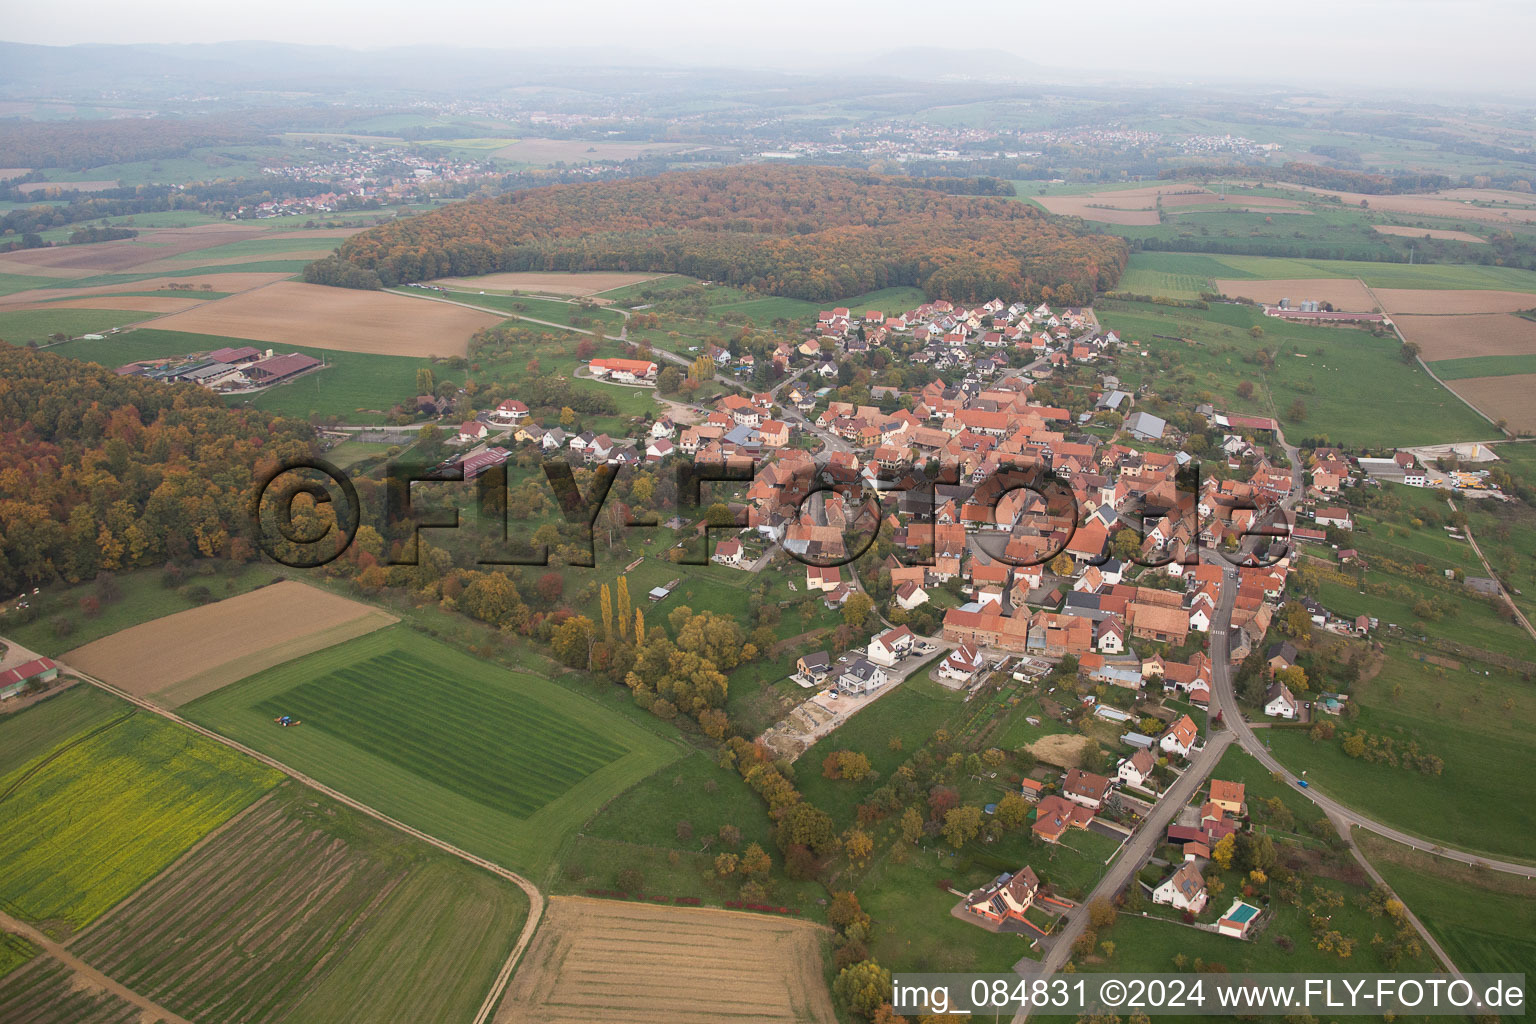 Village - view on the edge of agricultural fields and farmland in Engwiller in Grand Est, France